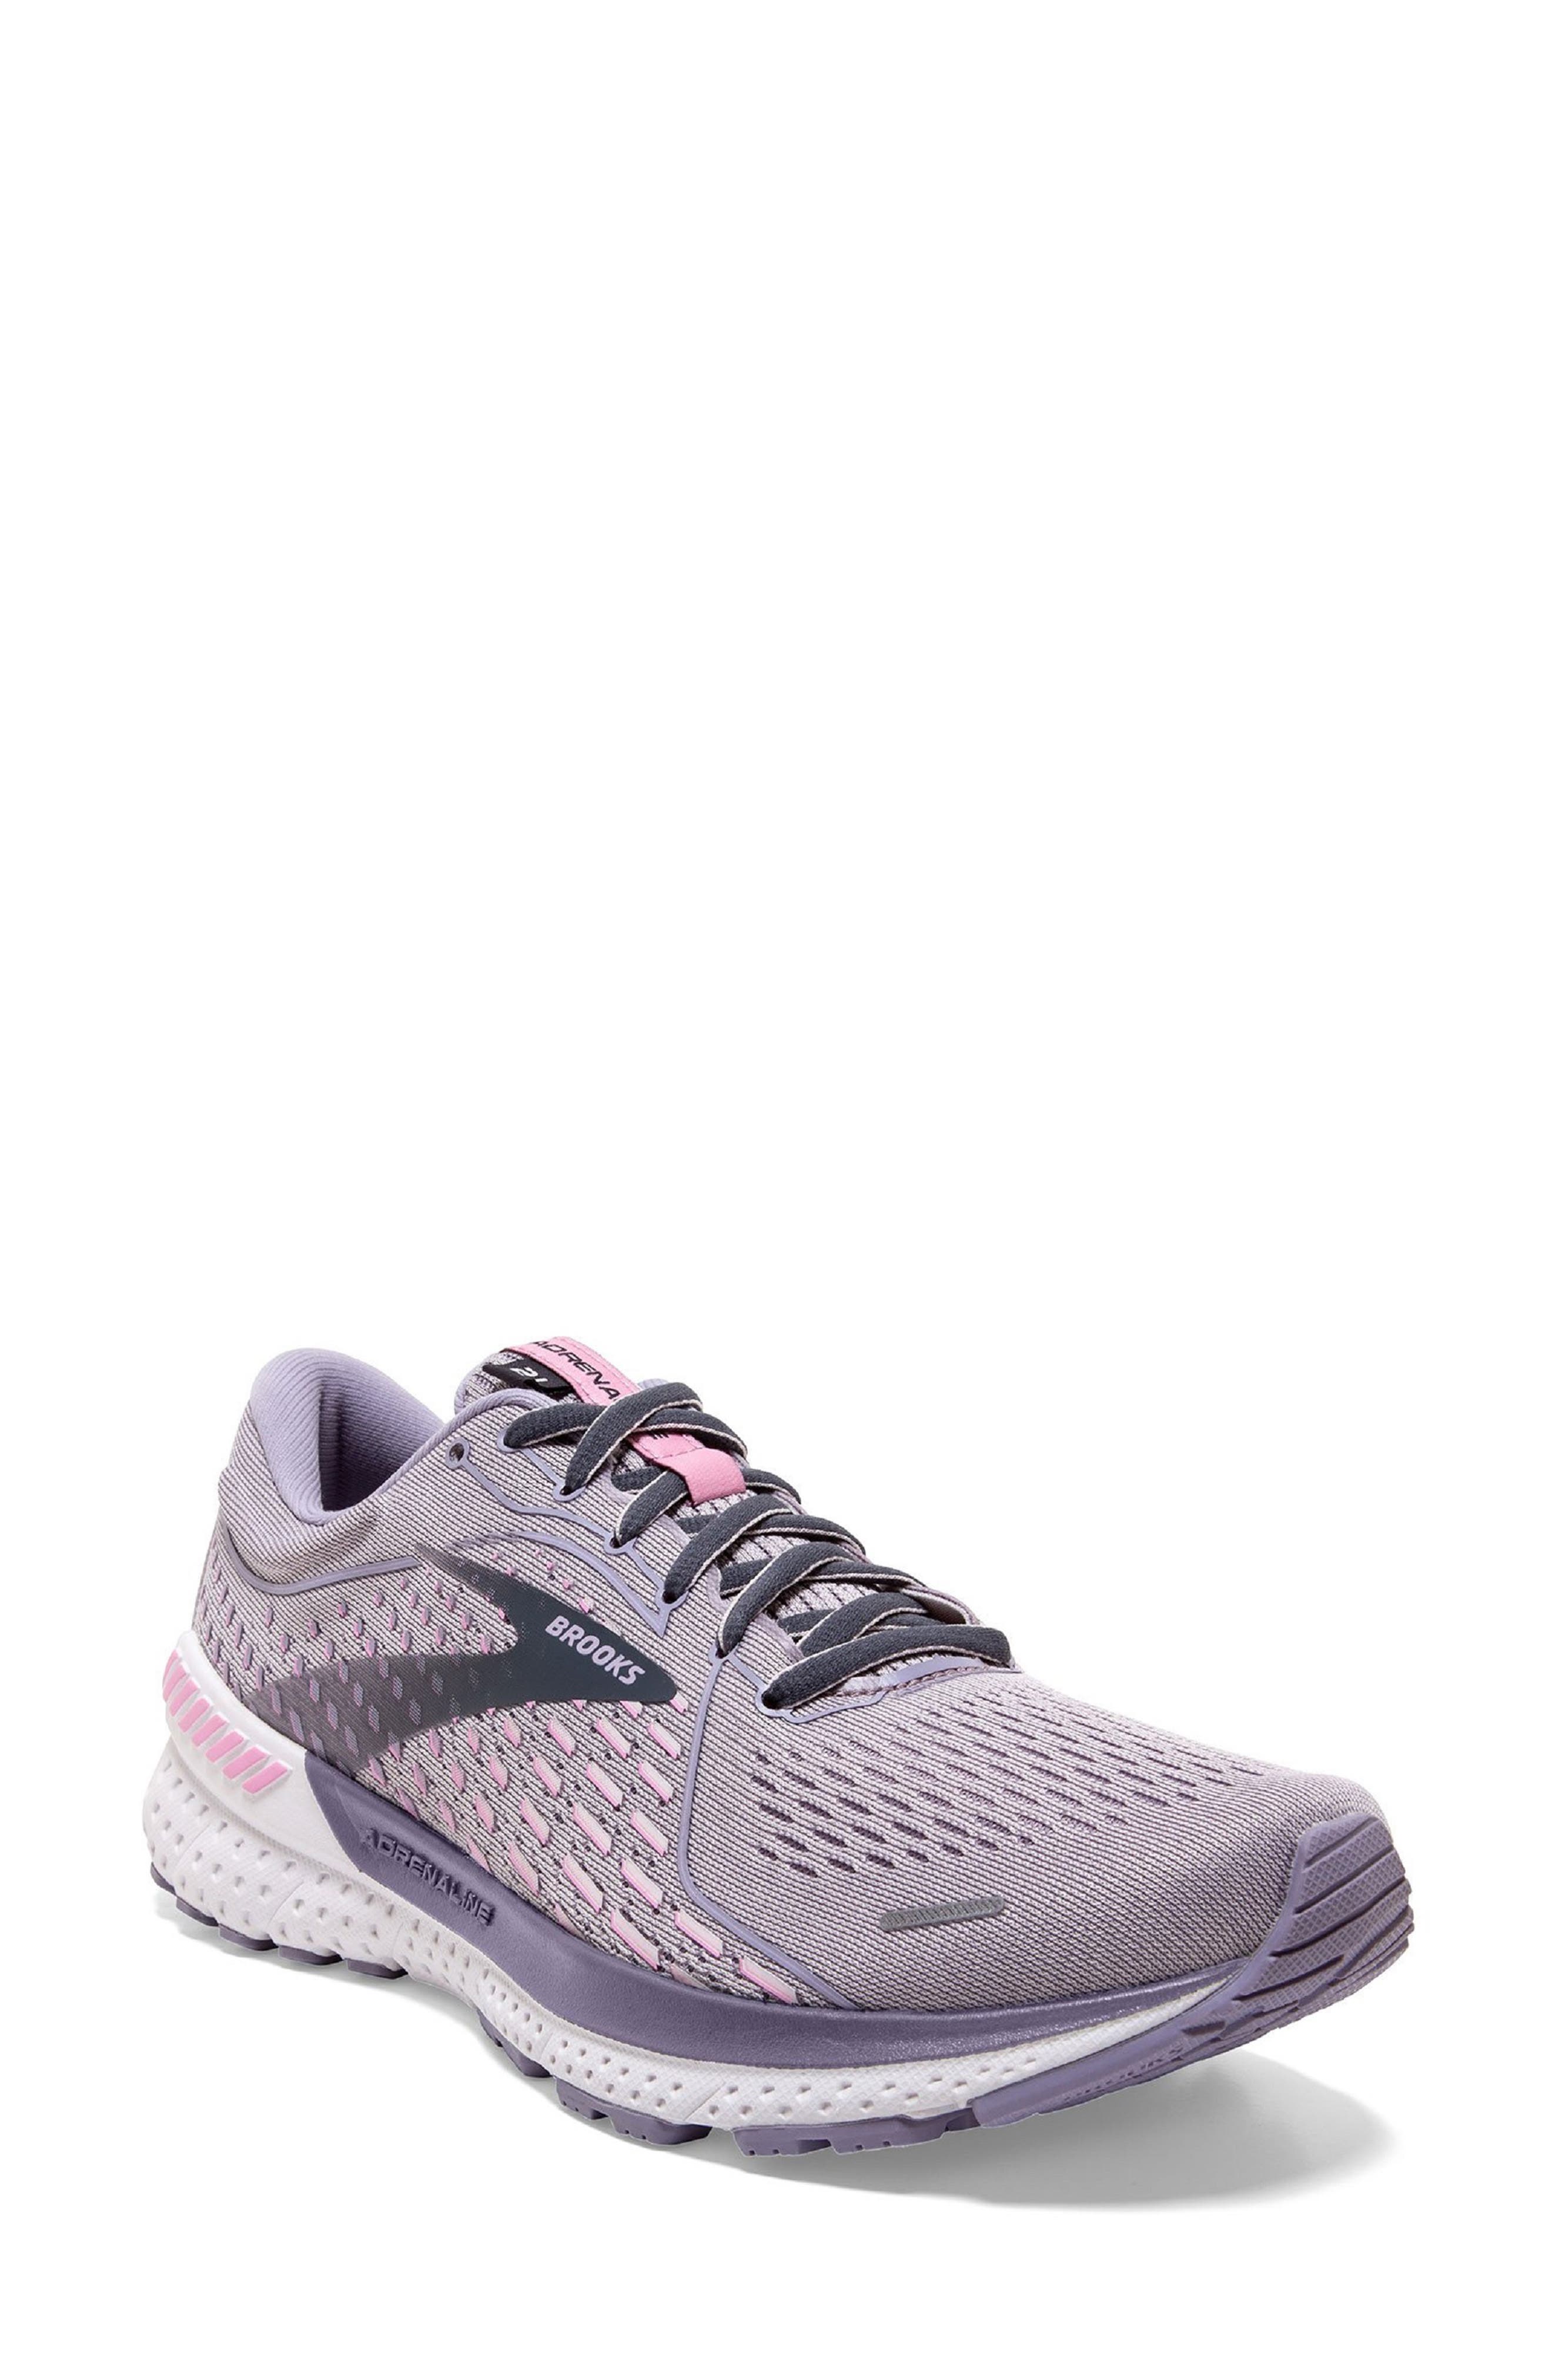 purple and grey sneakers